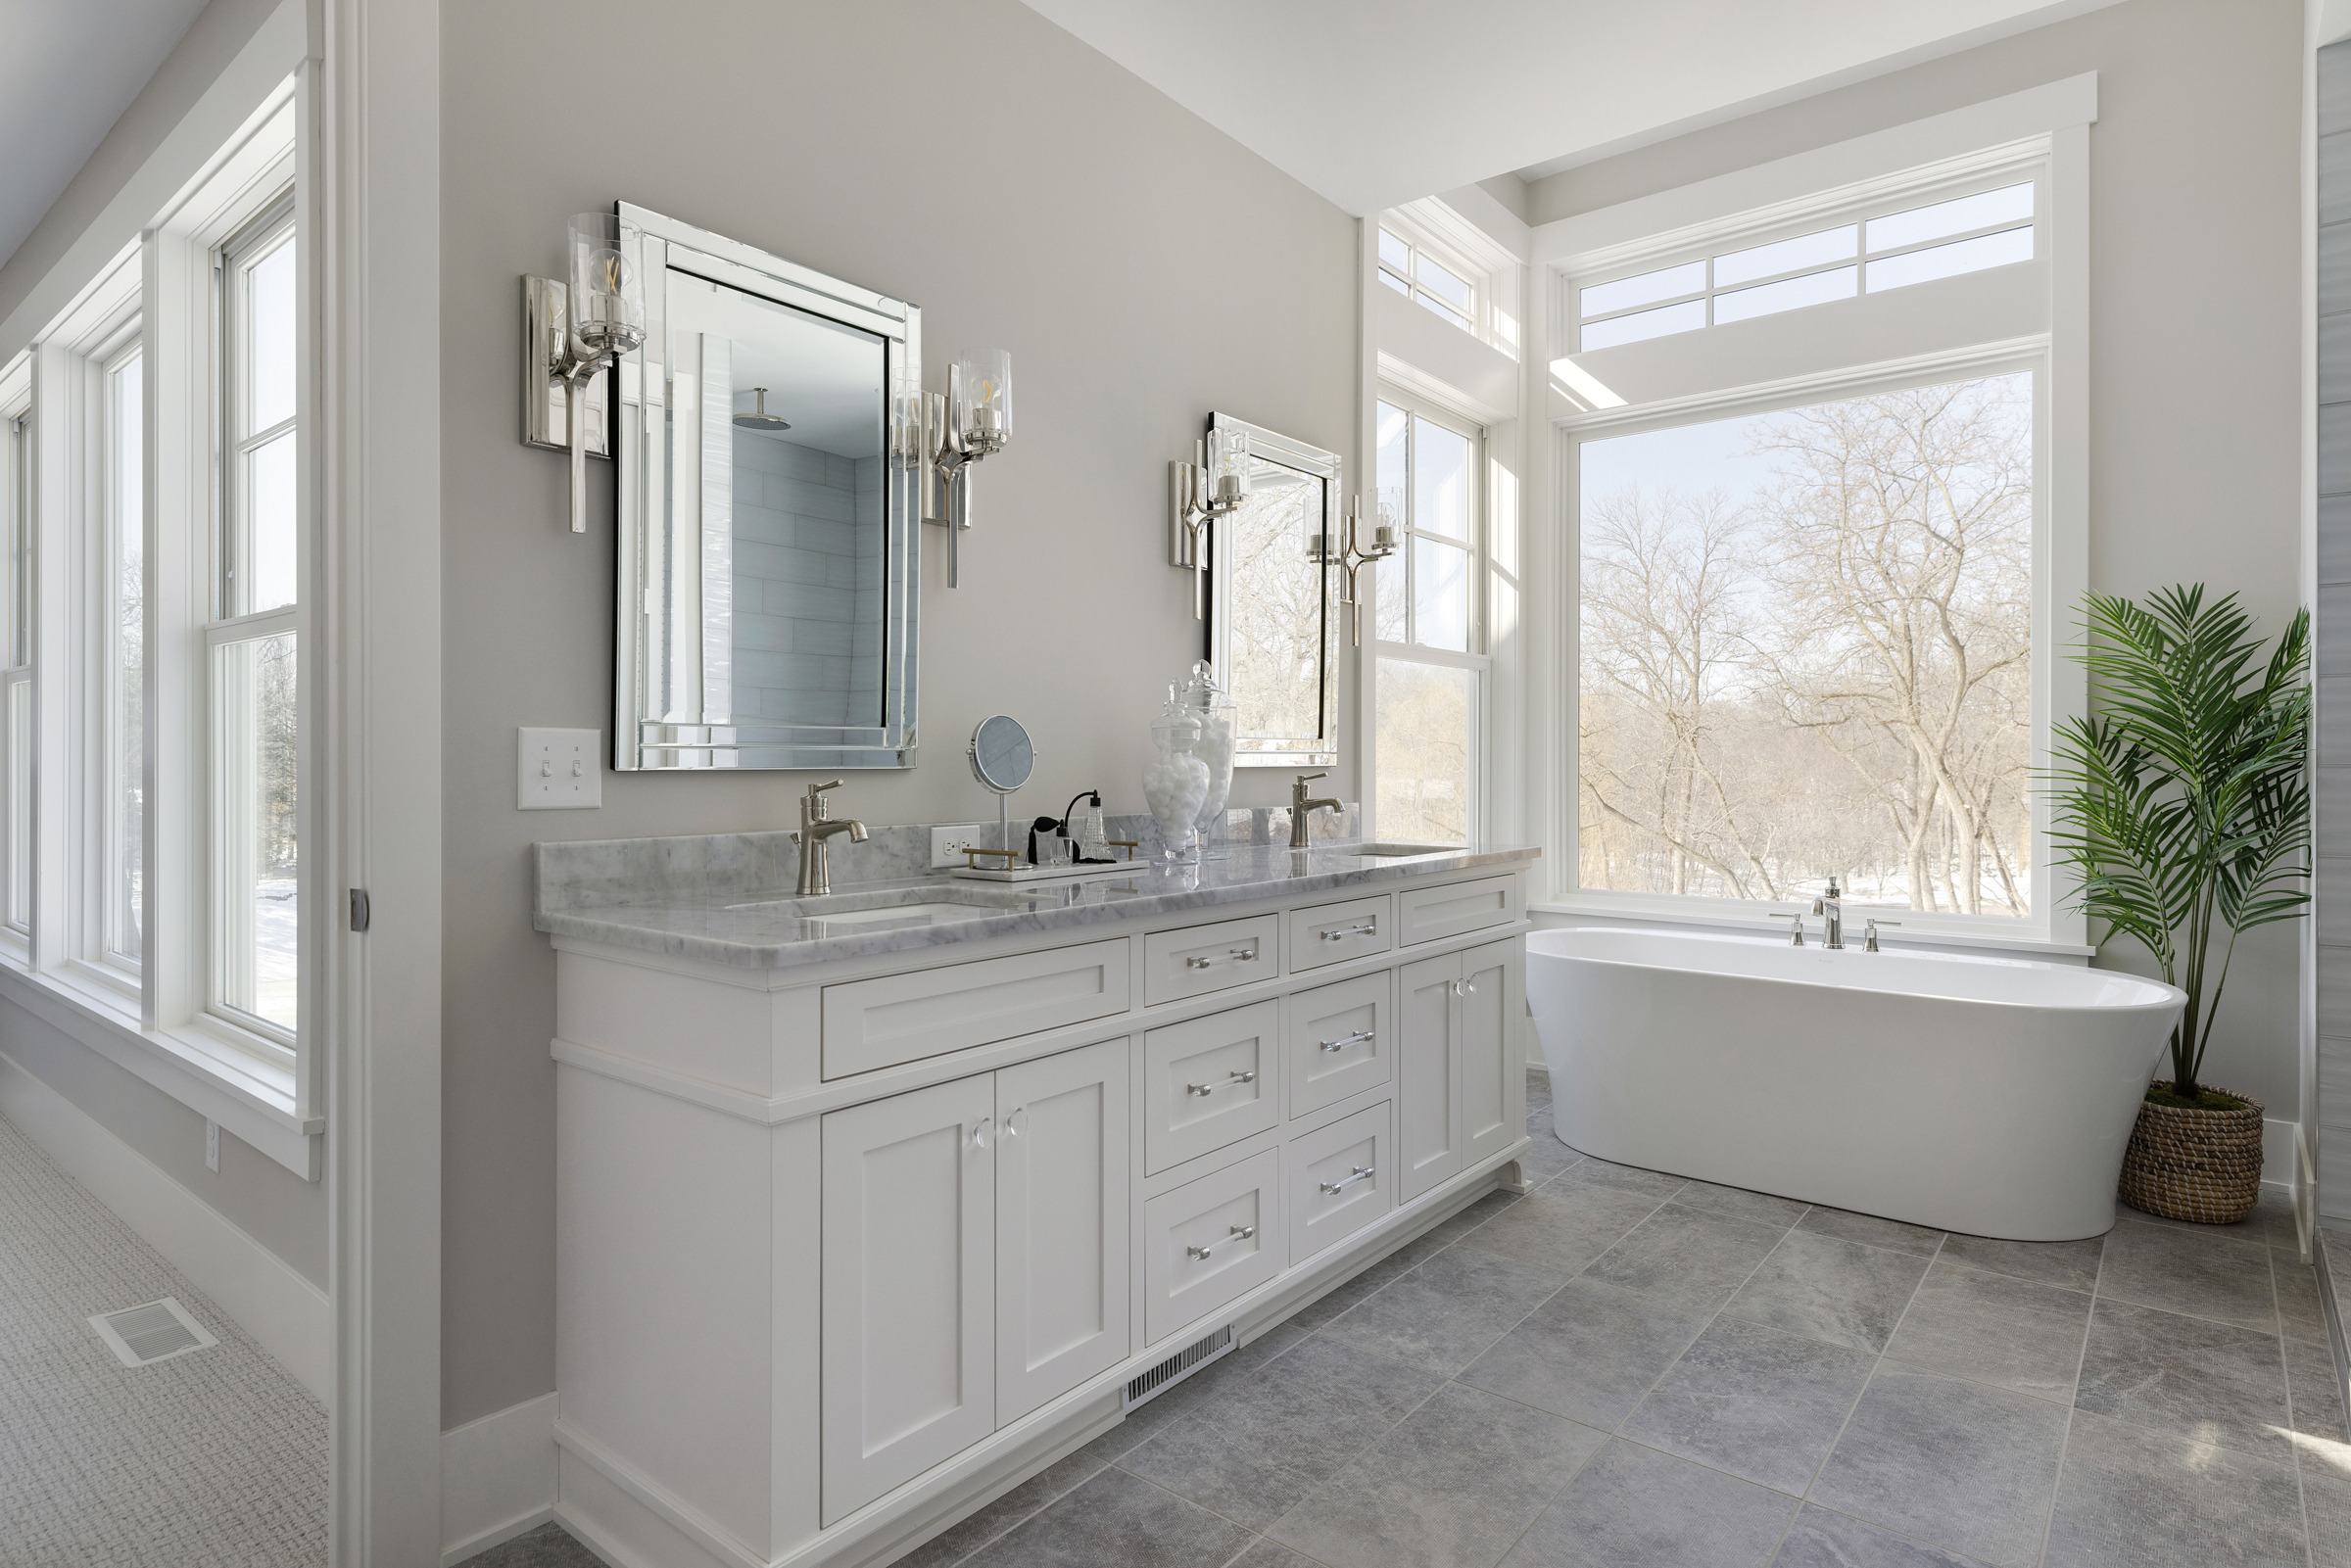 Master bathroom suite with white cabinets, a white soaker tub, and picture windows